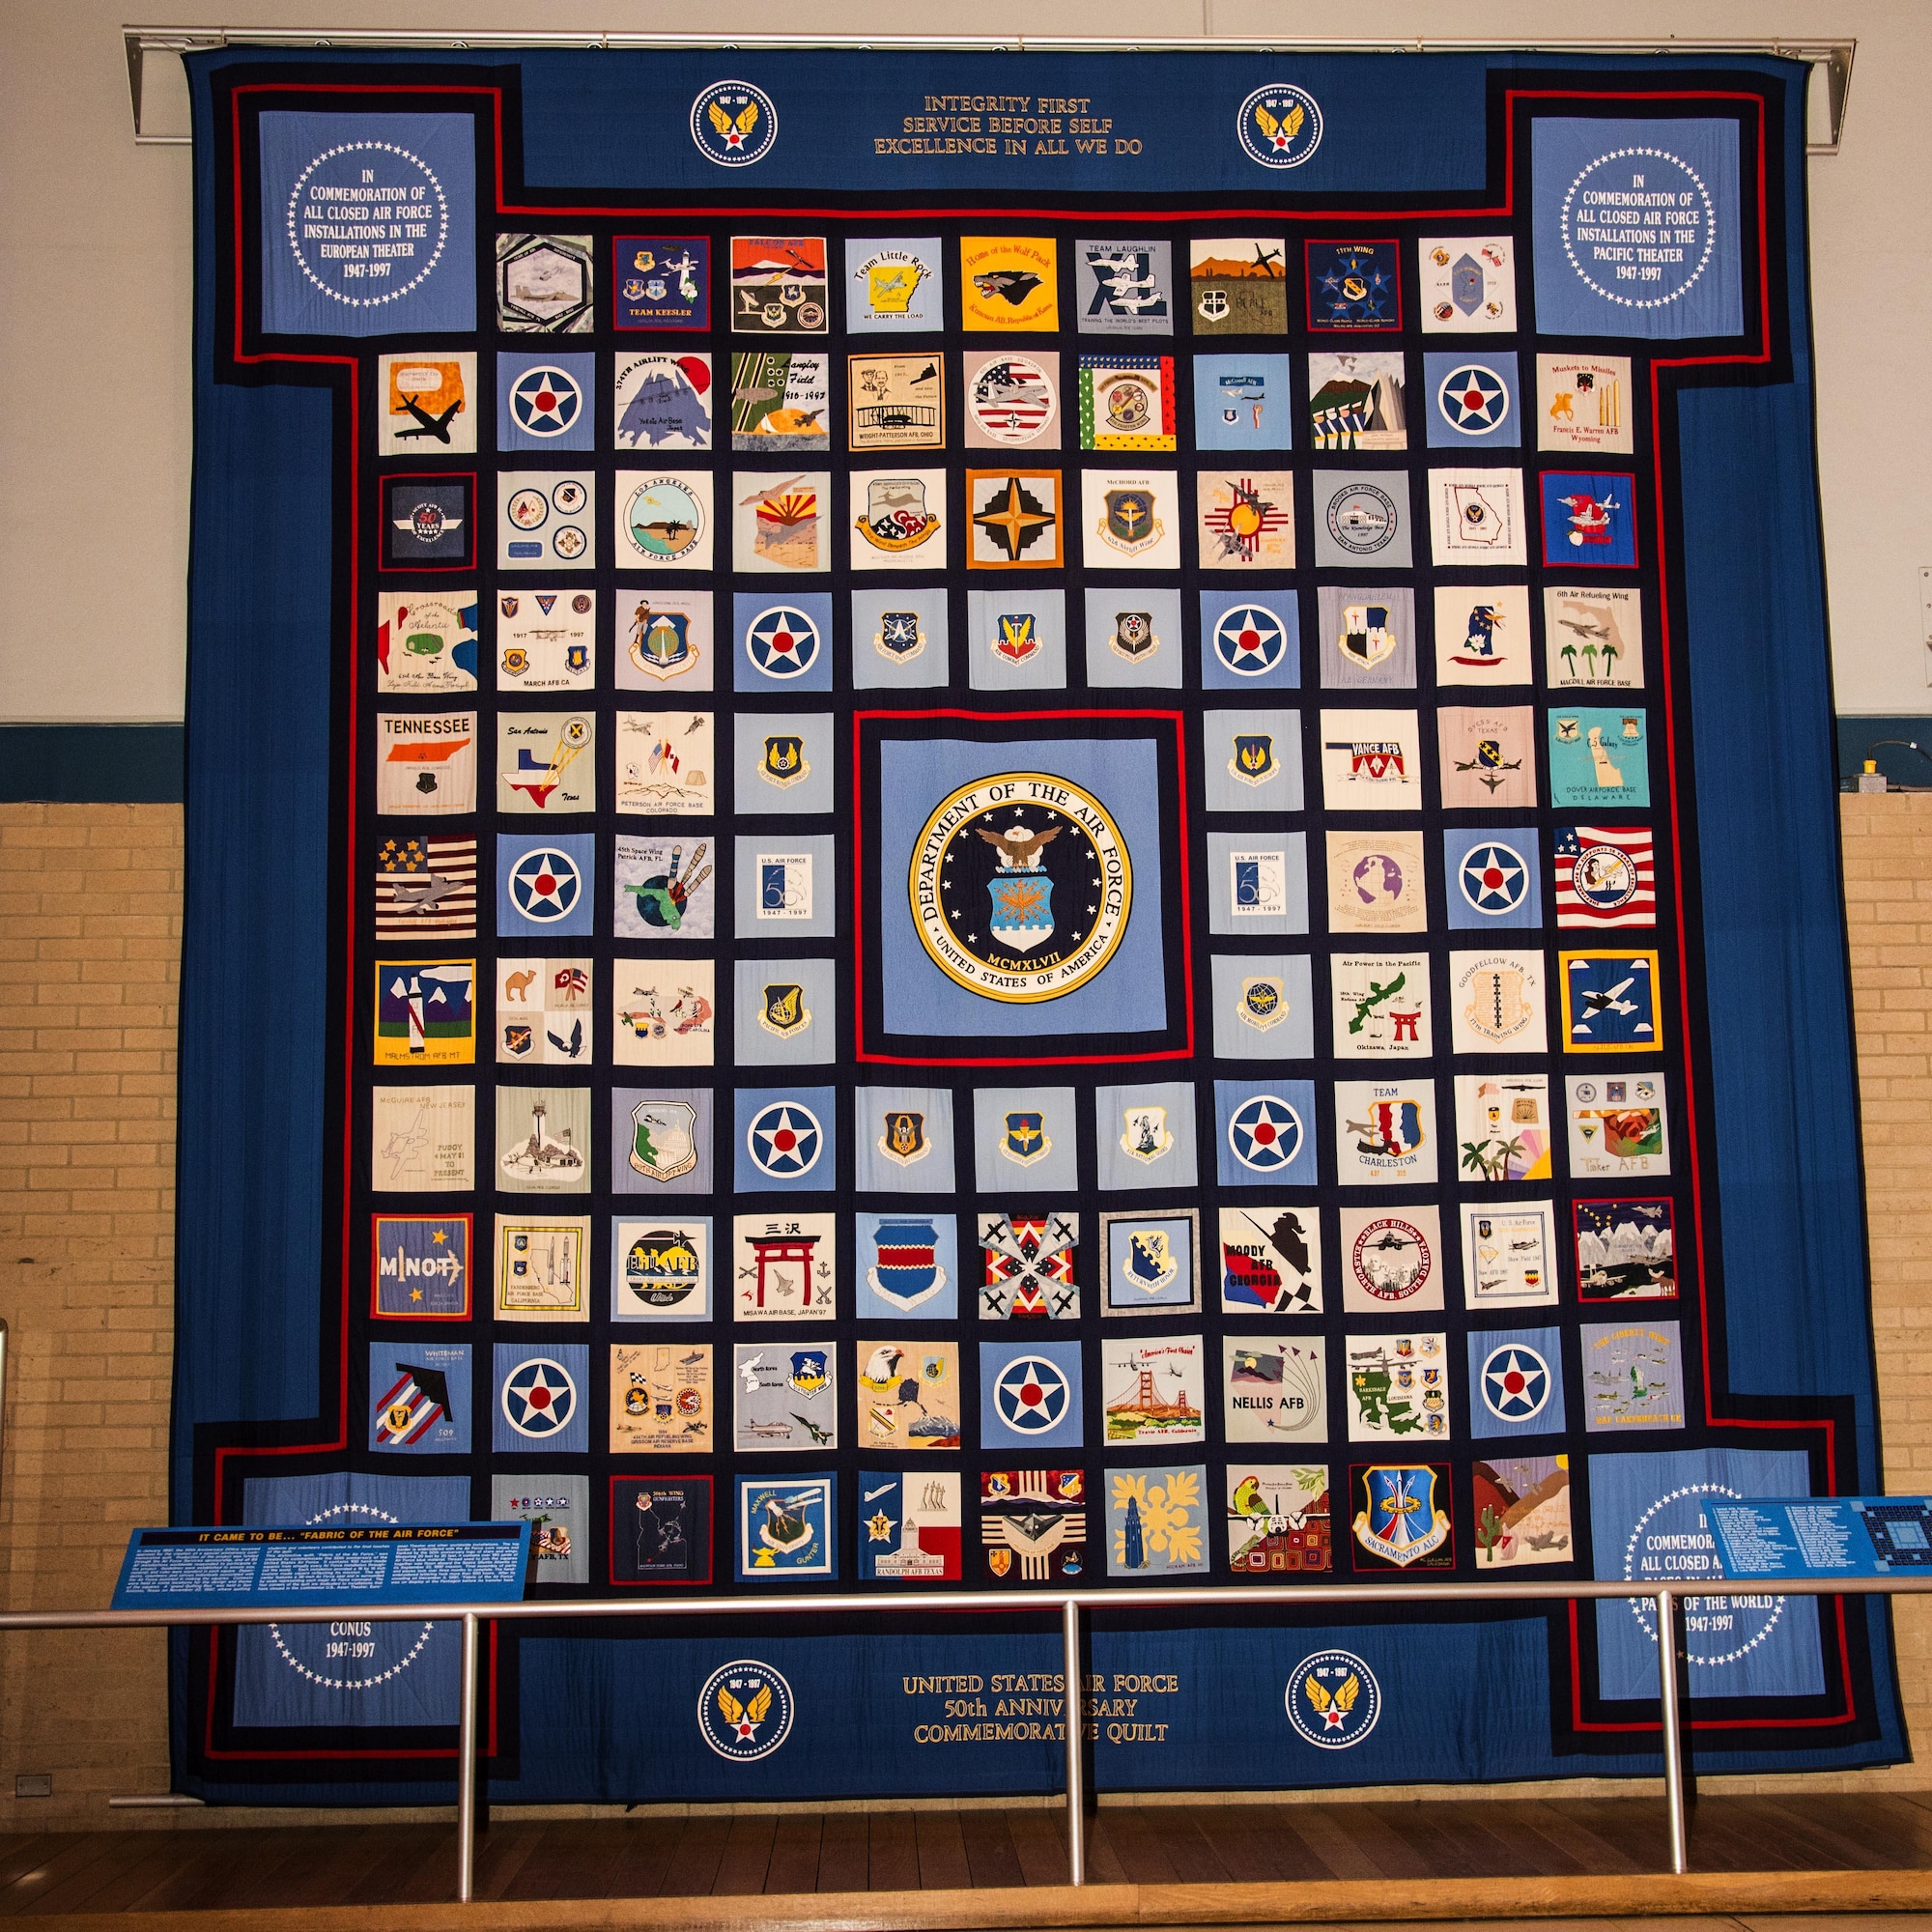 U.S. Air Force 50th Anniversary Commemorative Quilt